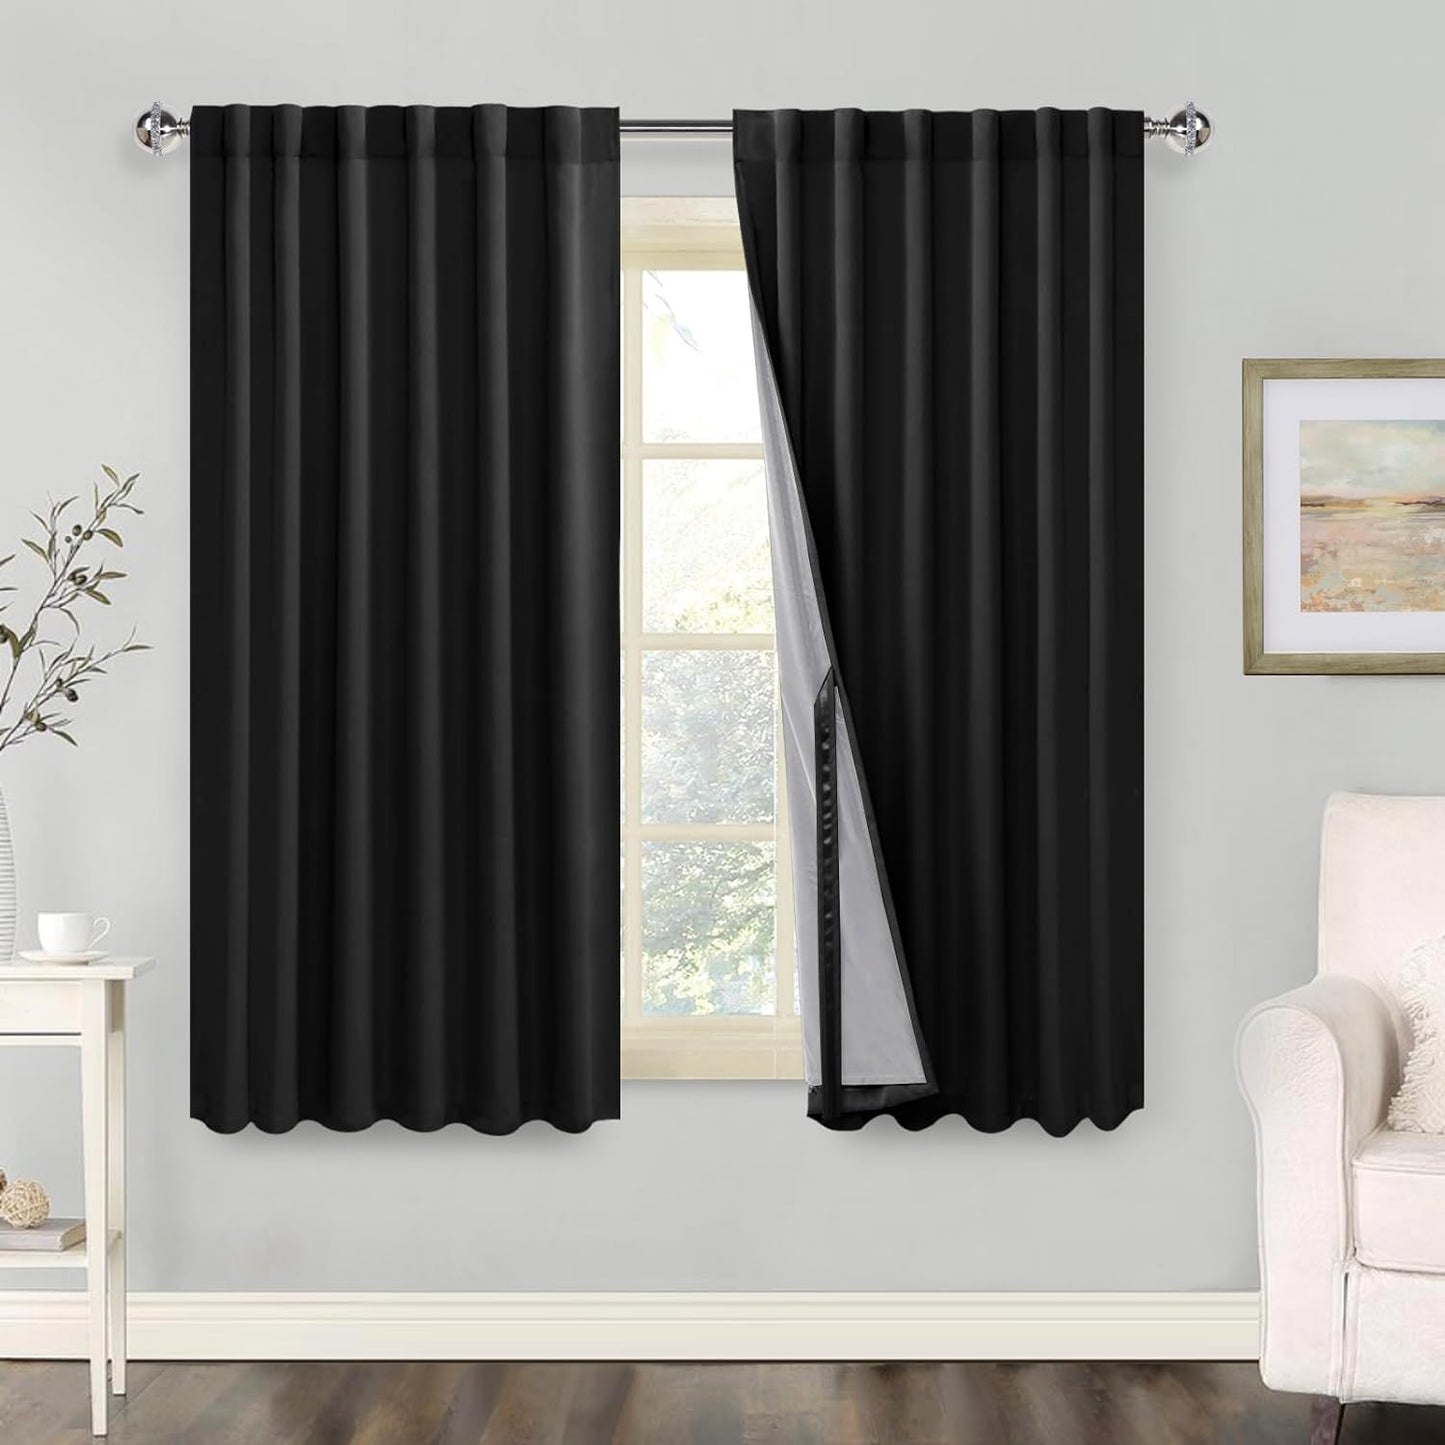 100% Blackout Curtains 2 Panels with Tiebacks- Heat and Full Light Blocking Window Treatment with Black Liner for Bedroom/Nursery, Rod Pocket & Back Tab，White, W52 X L84 Inches Long, Set of 2  XWZO Black W52" X L45"|2 Panels 